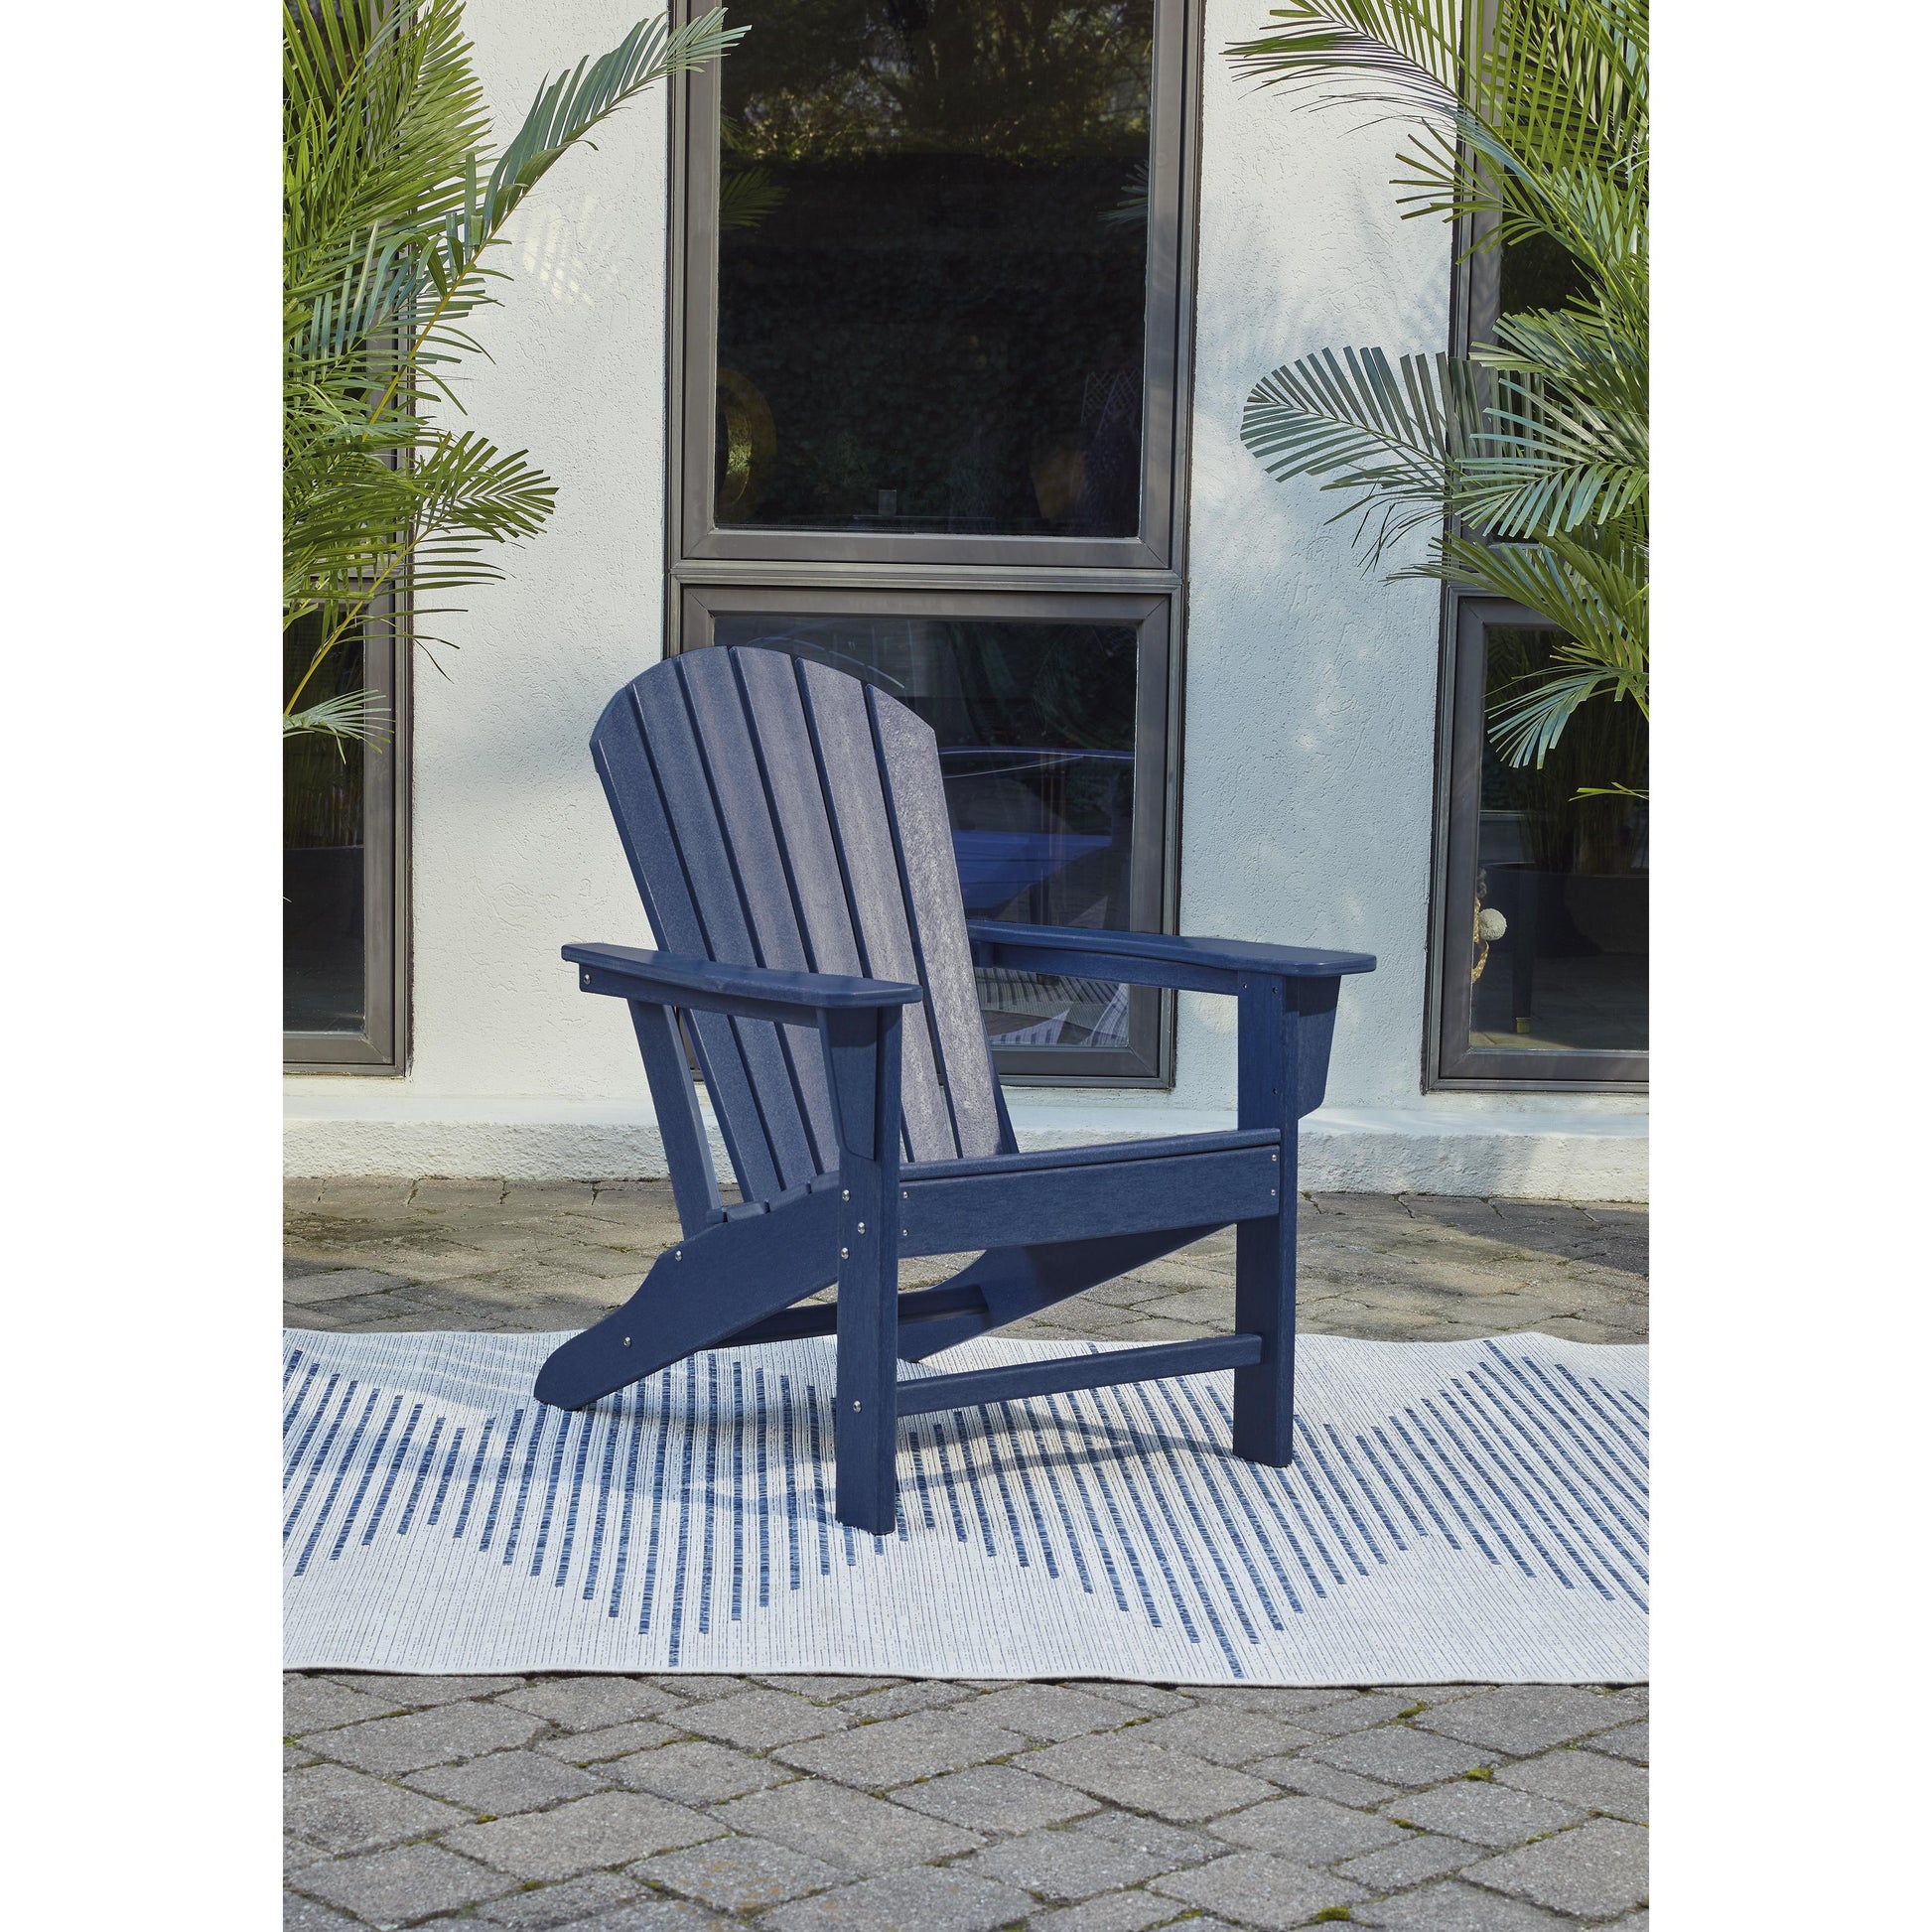 Signature Design by Ashley Outdoor Seating Adirondack Chairs P009-898 IMAGE 5